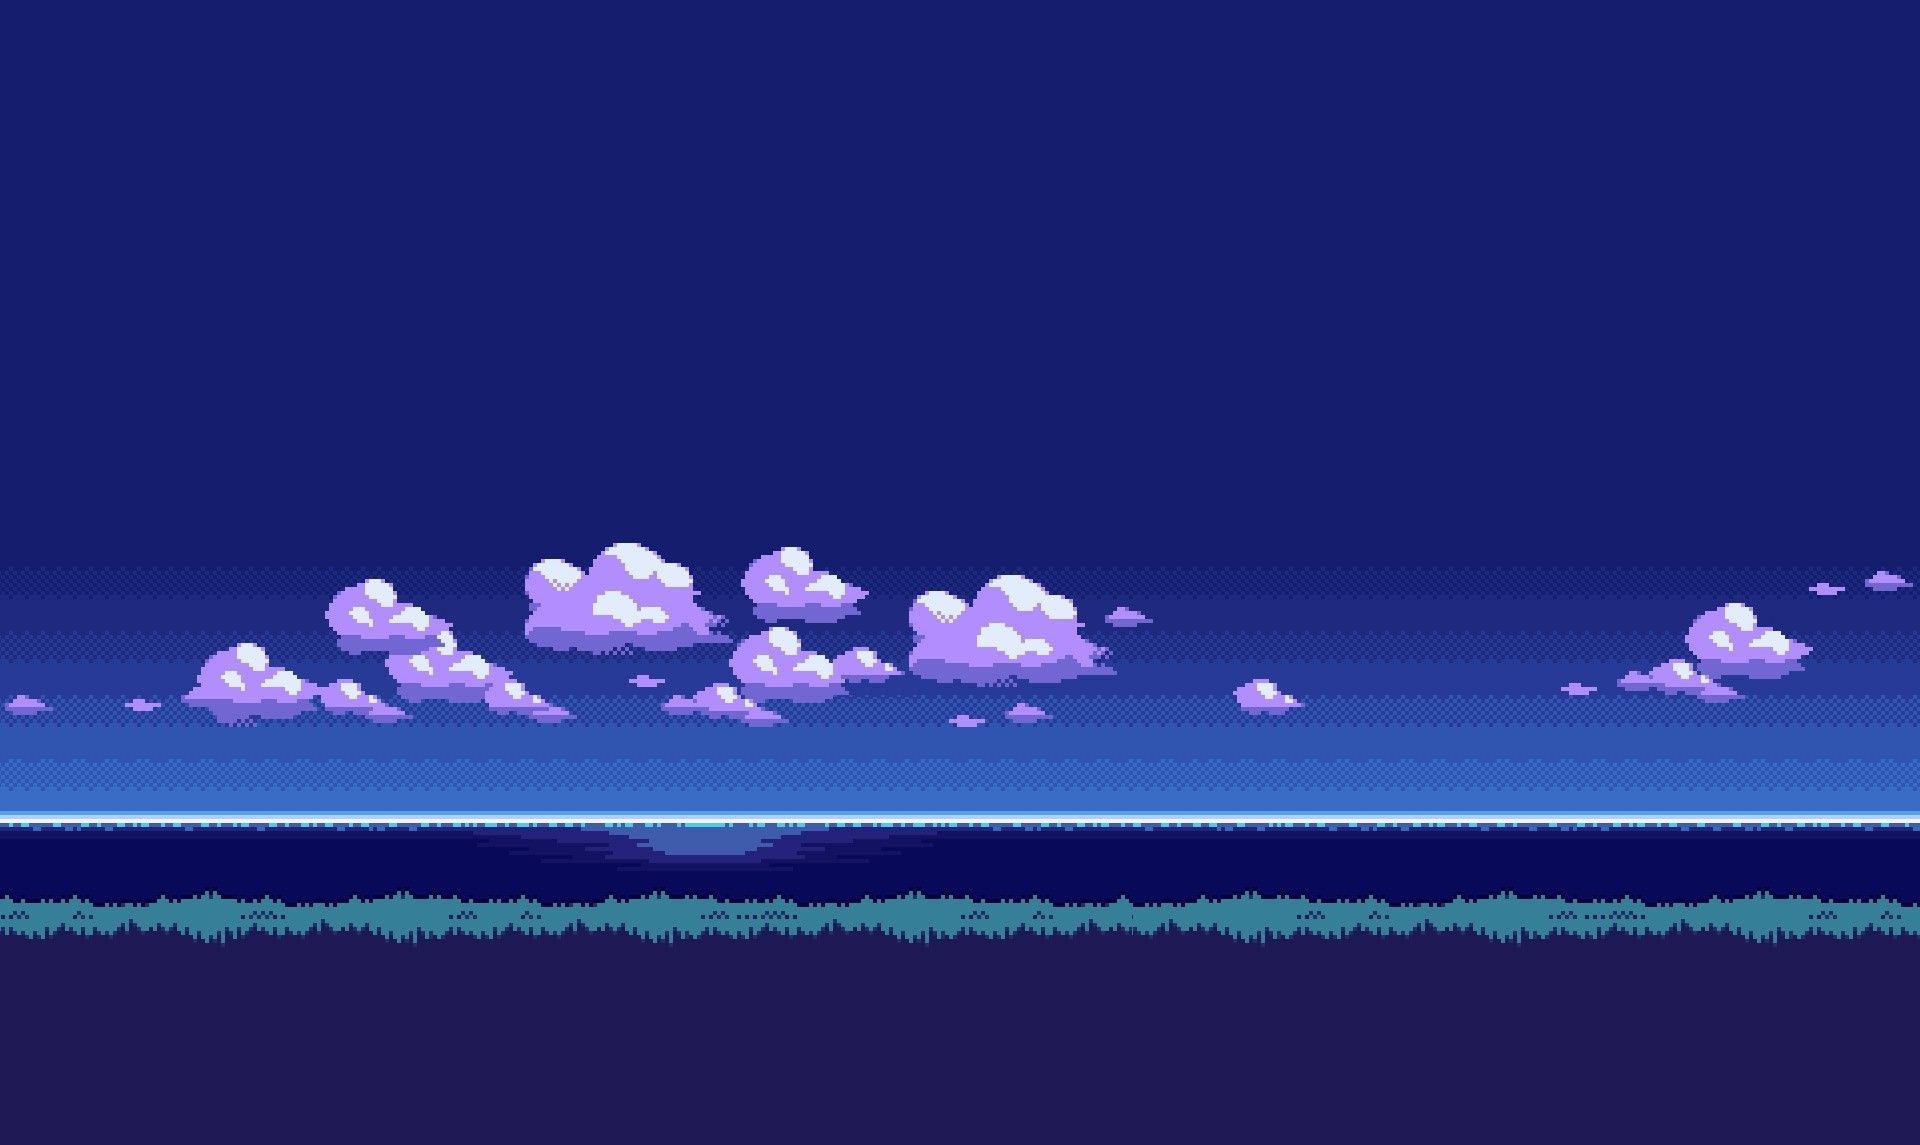 A purple and blue sky with clouds - Pixel art